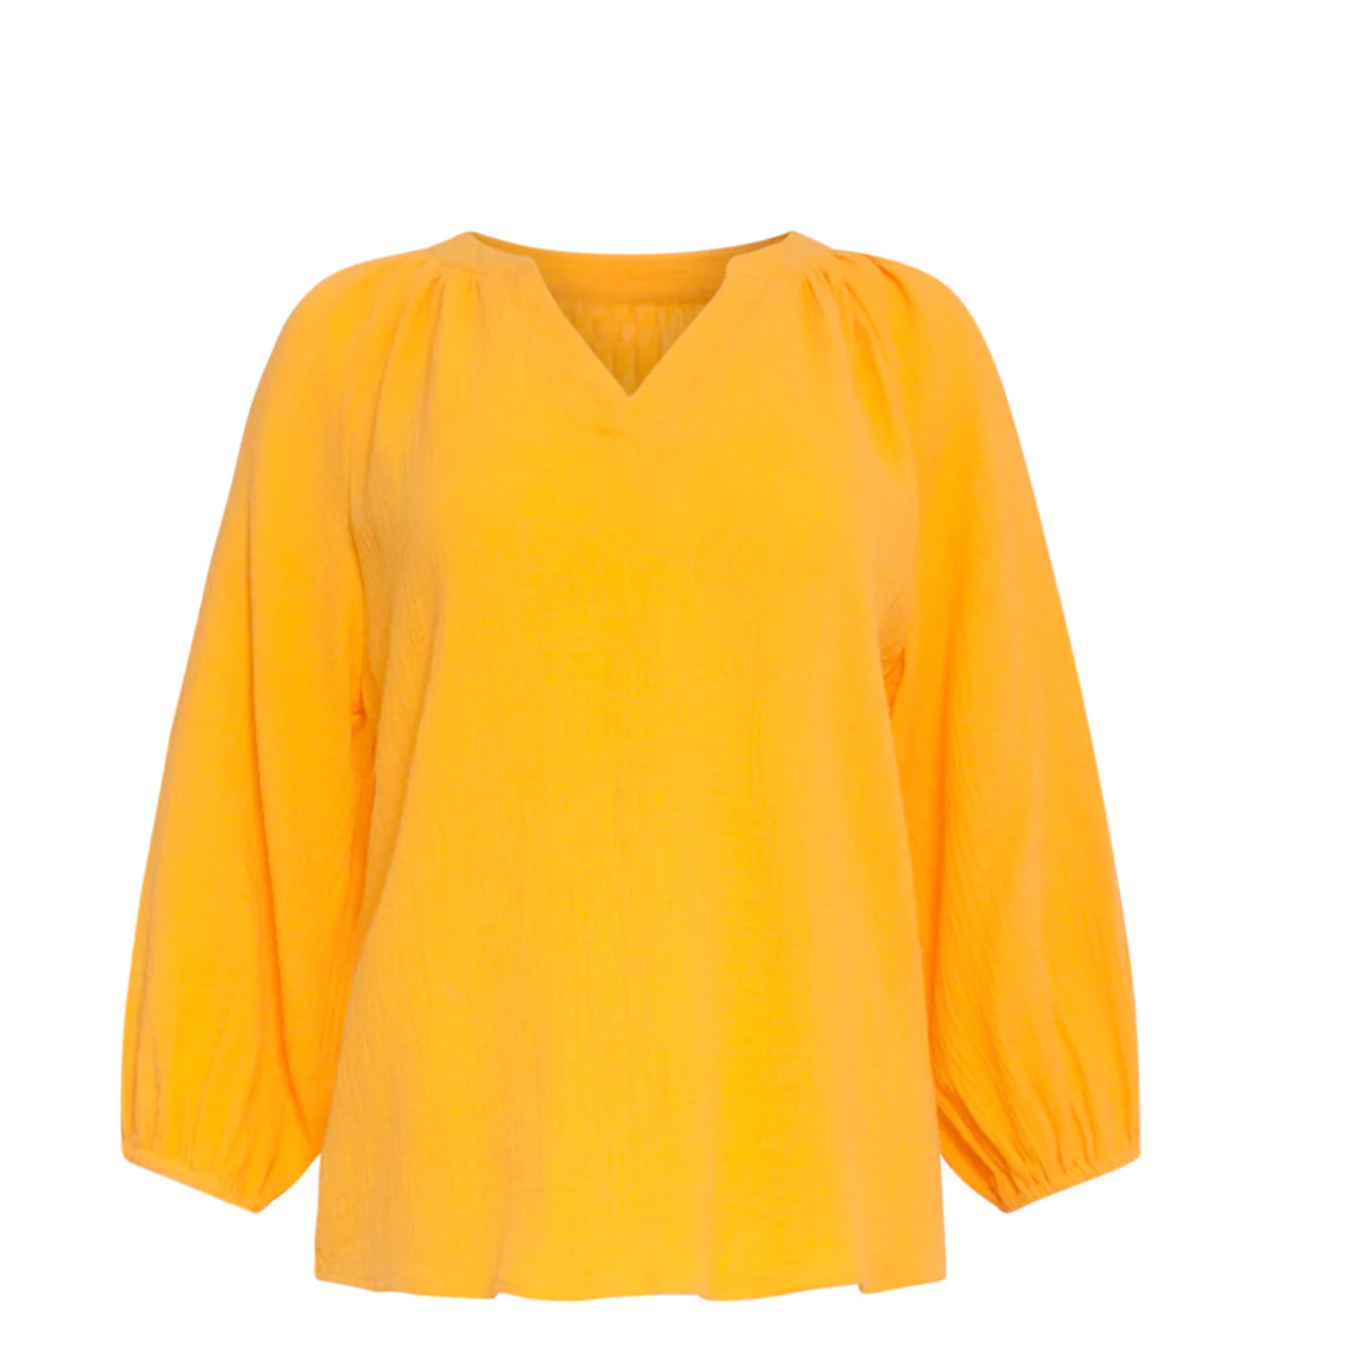 AIRY TOP IN WARM SUNNY YELLOW TETRA